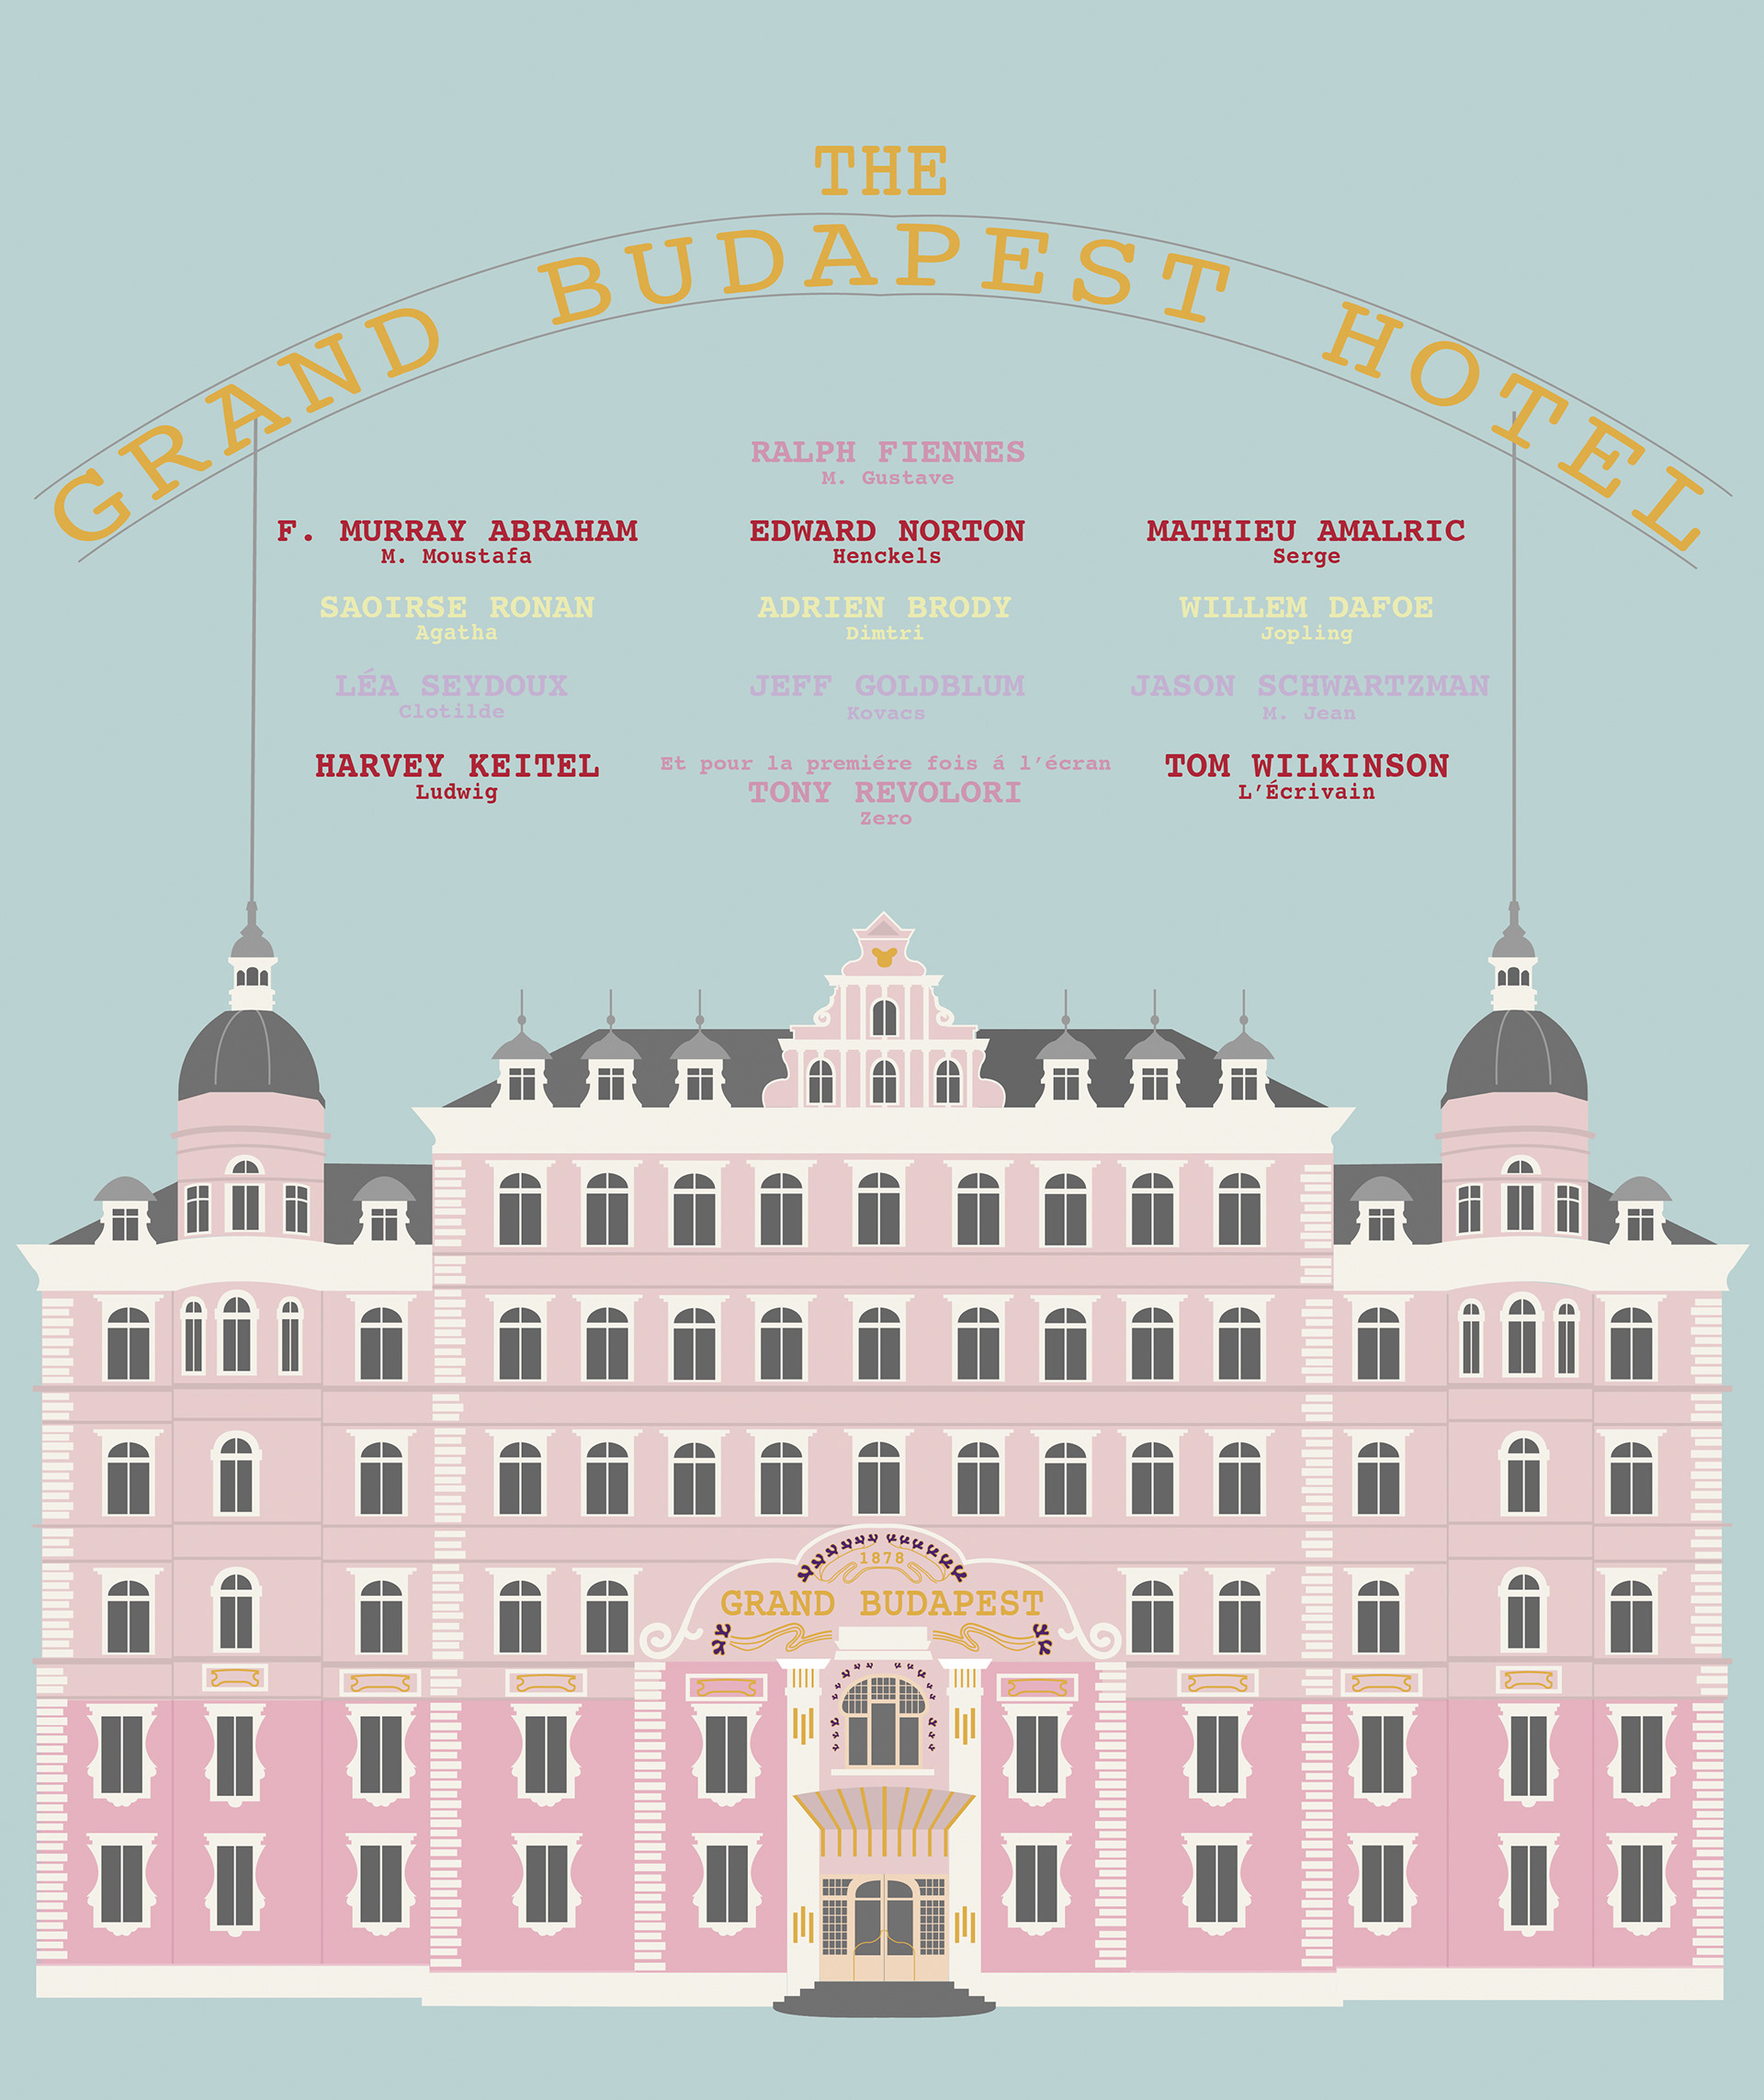 The Grand Budapest Hotel Wallpaper Grand Budapest Hotel - Food Breakfast Word Search , HD Wallpaper & Backgrounds